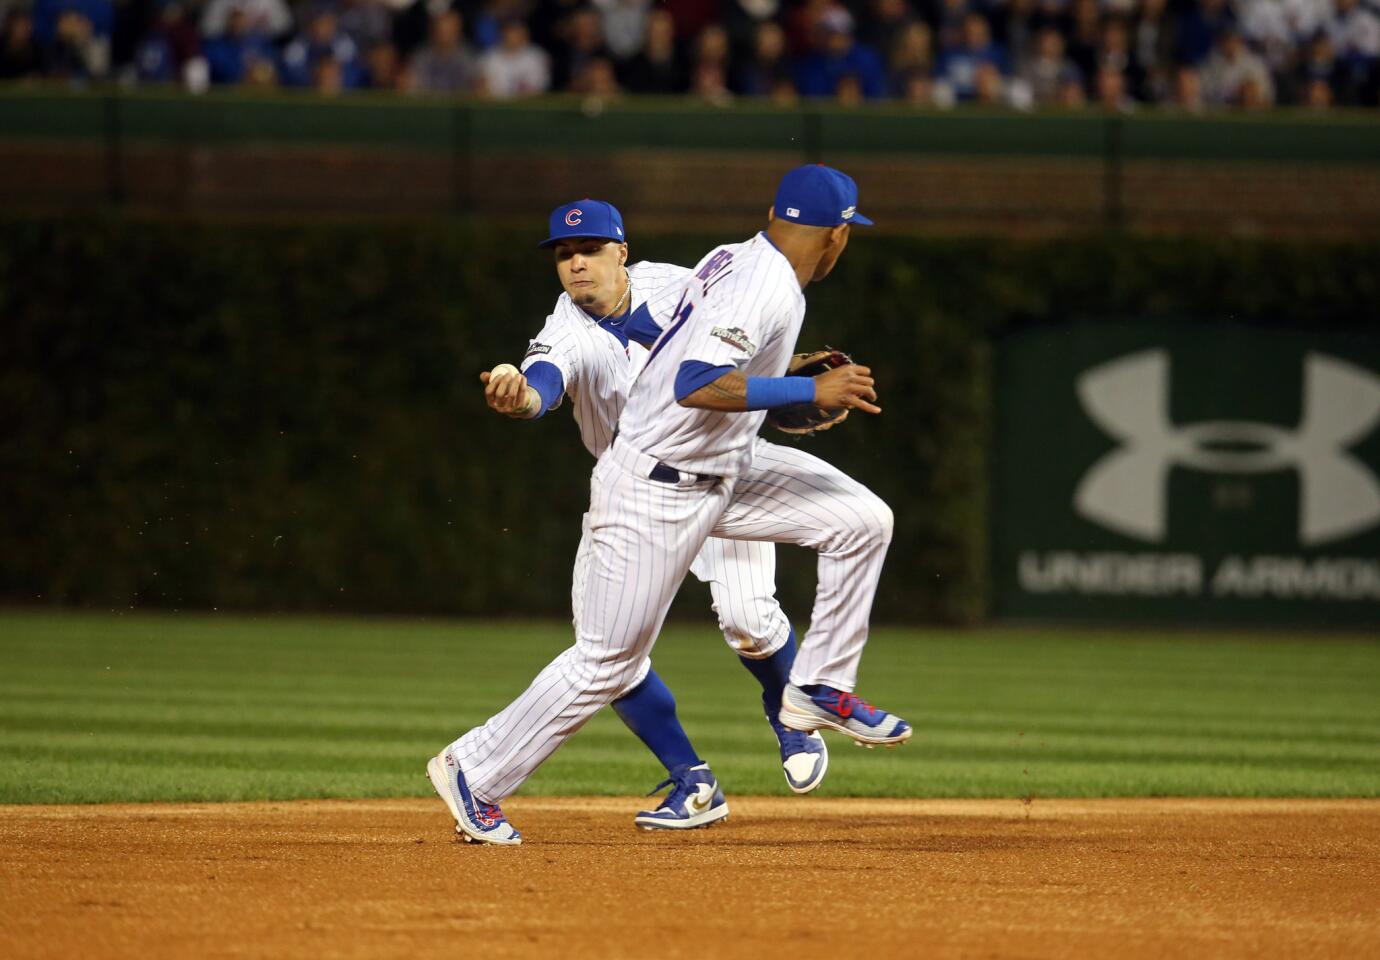 NLDS Game 1: Cubs 1, Giants 0